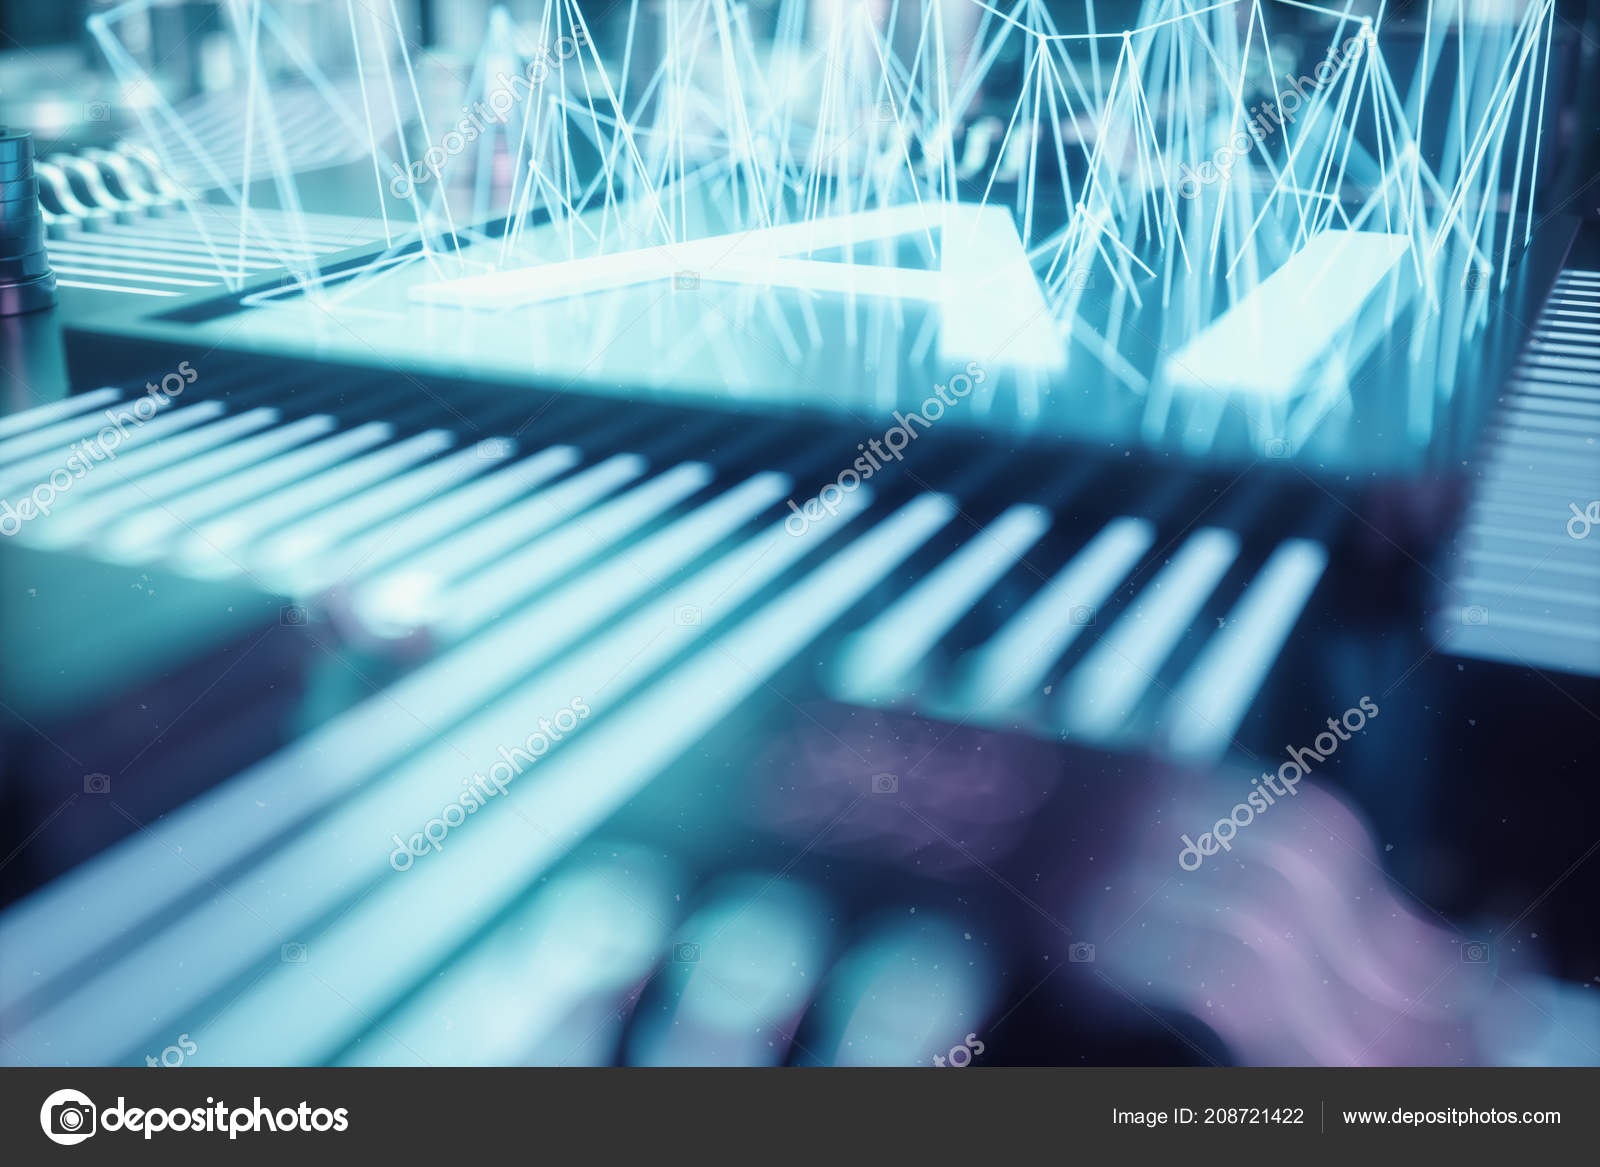 3D illustration abstract artificial intelligence on a printed circuit board. Technology and engineering concept. Neurons of artificial intelligence. Electronic chip, head processor. â€” Stock Photo